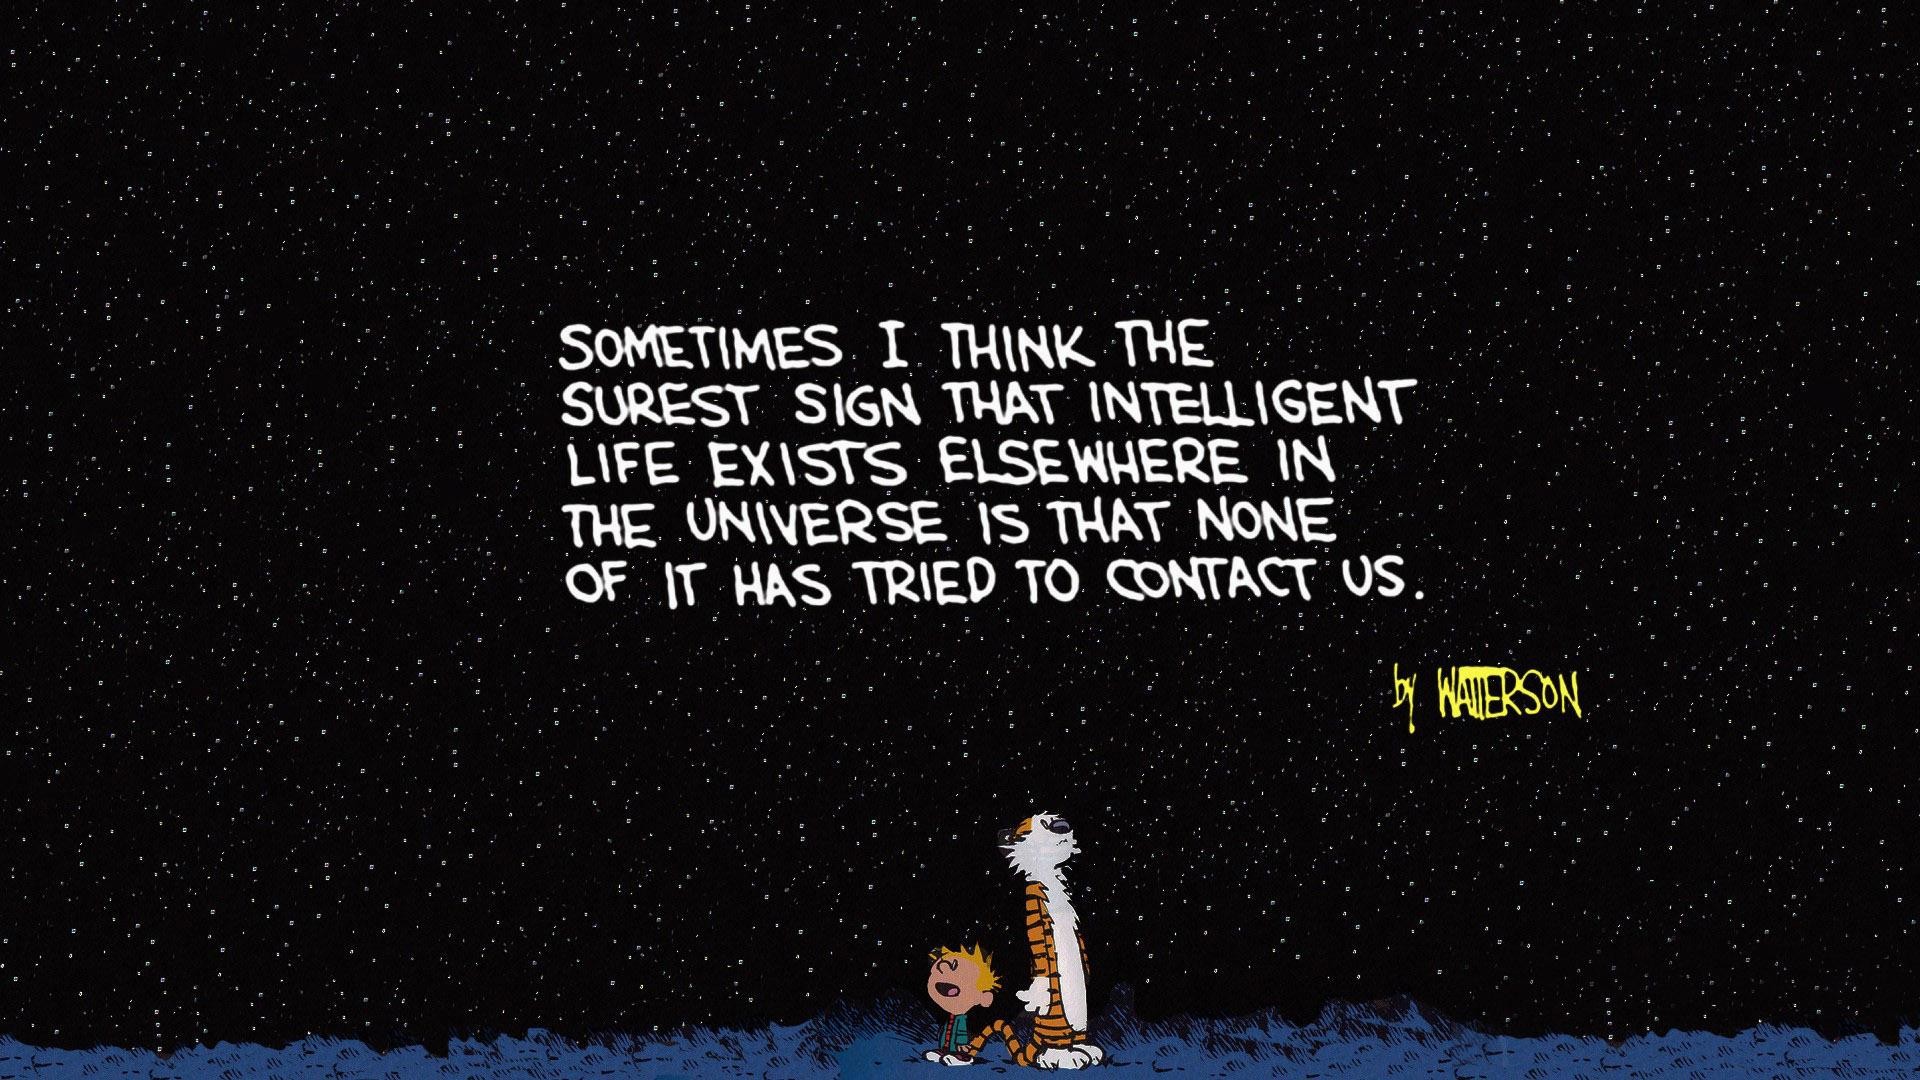 1920x1080 Calvin-and-Hobbes-Watterson-quote-wallpaper-wp4003908